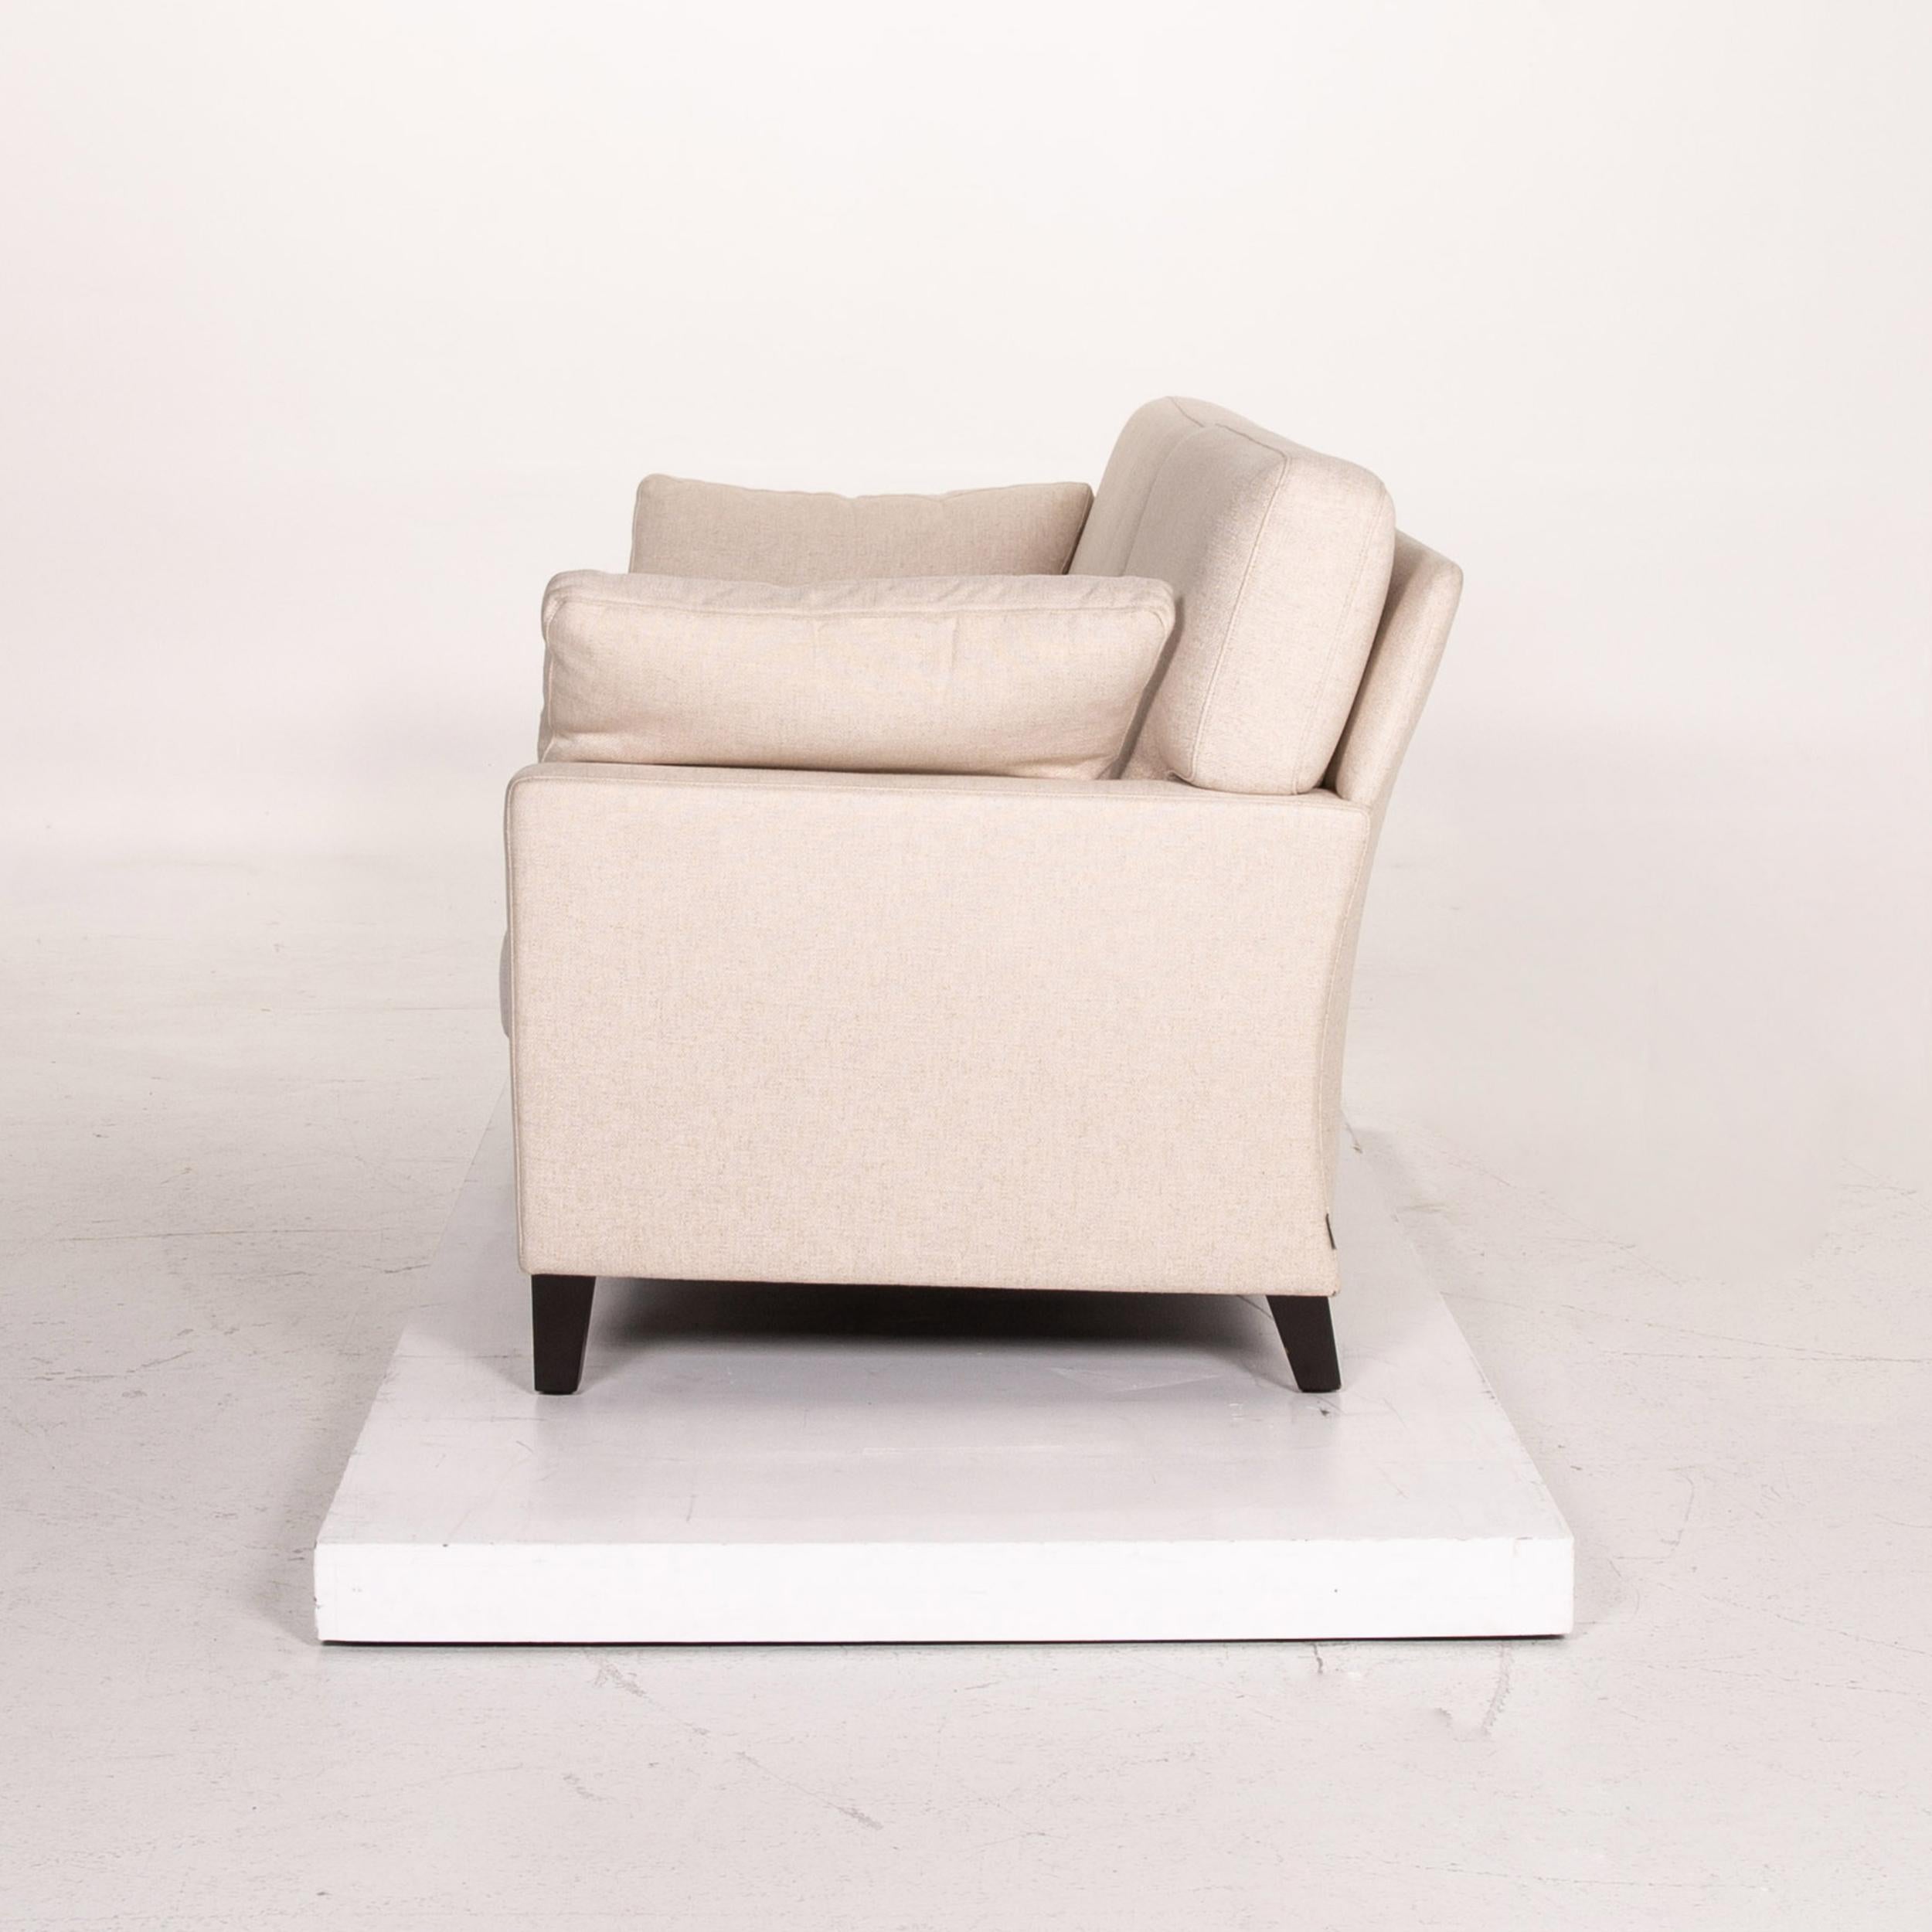 Walter Knoll Henry Fabric Sofa Cream Two-Seat Couch 5